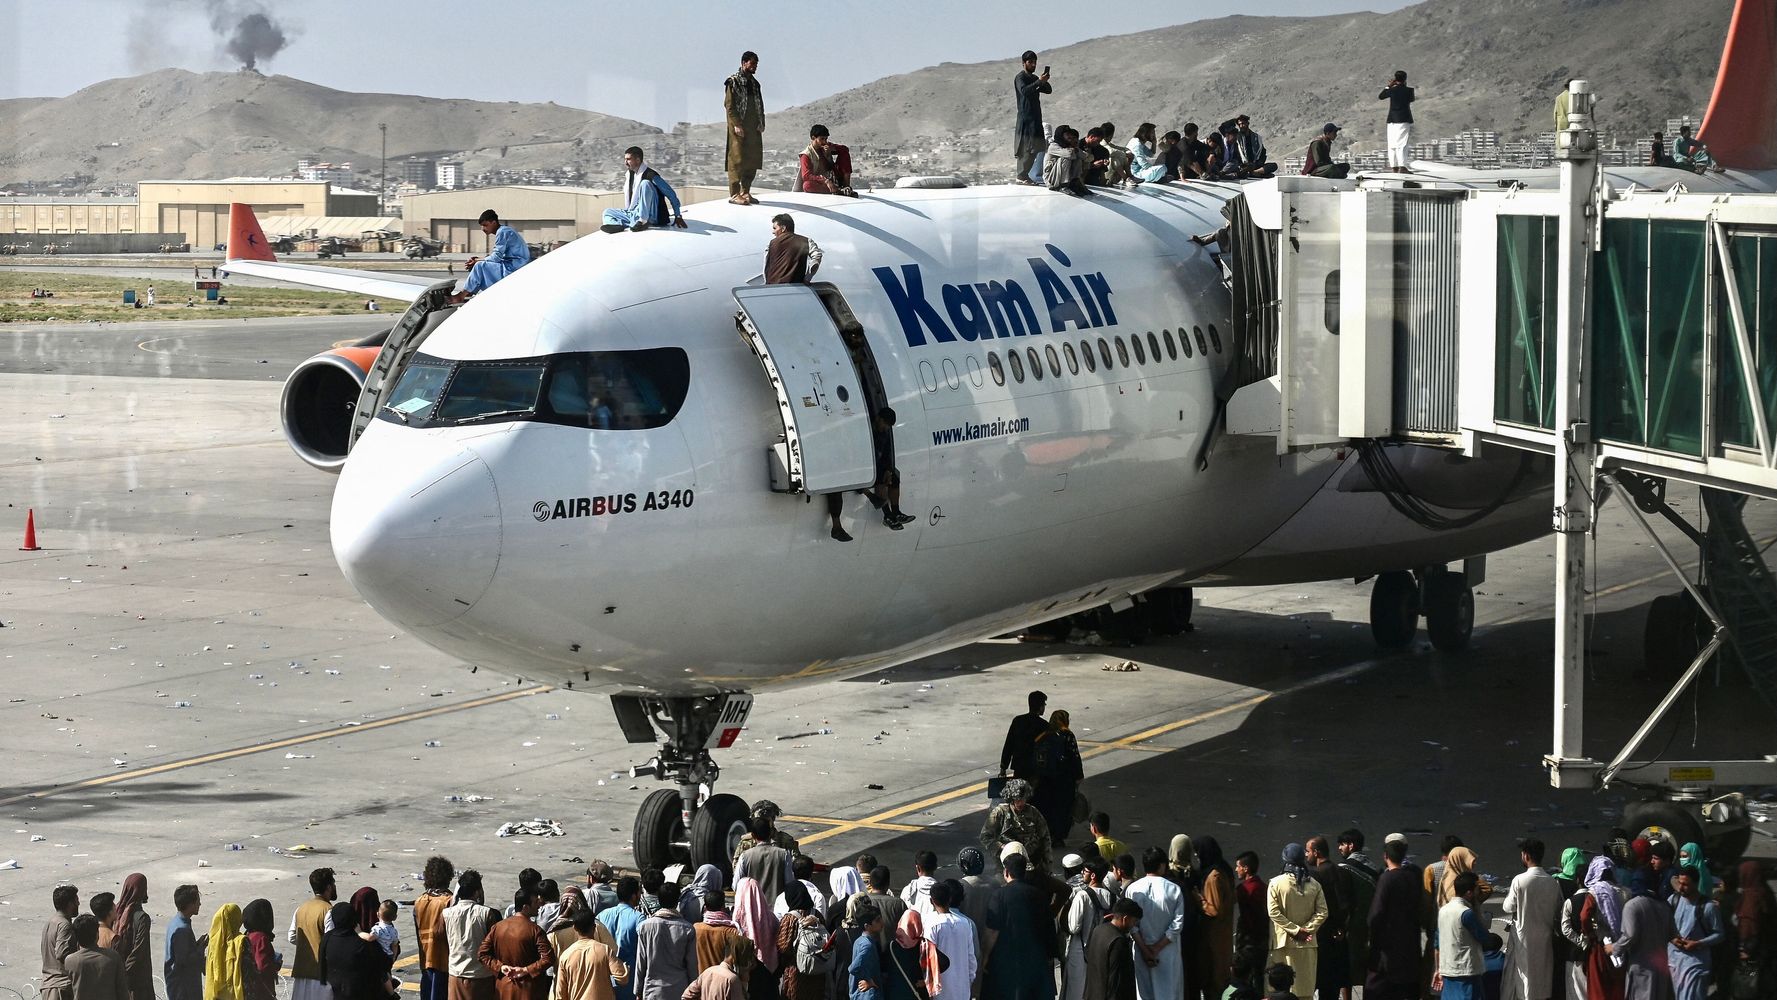 Photos Capture The Disintegration Of Kabul As Thousands Try To Flee